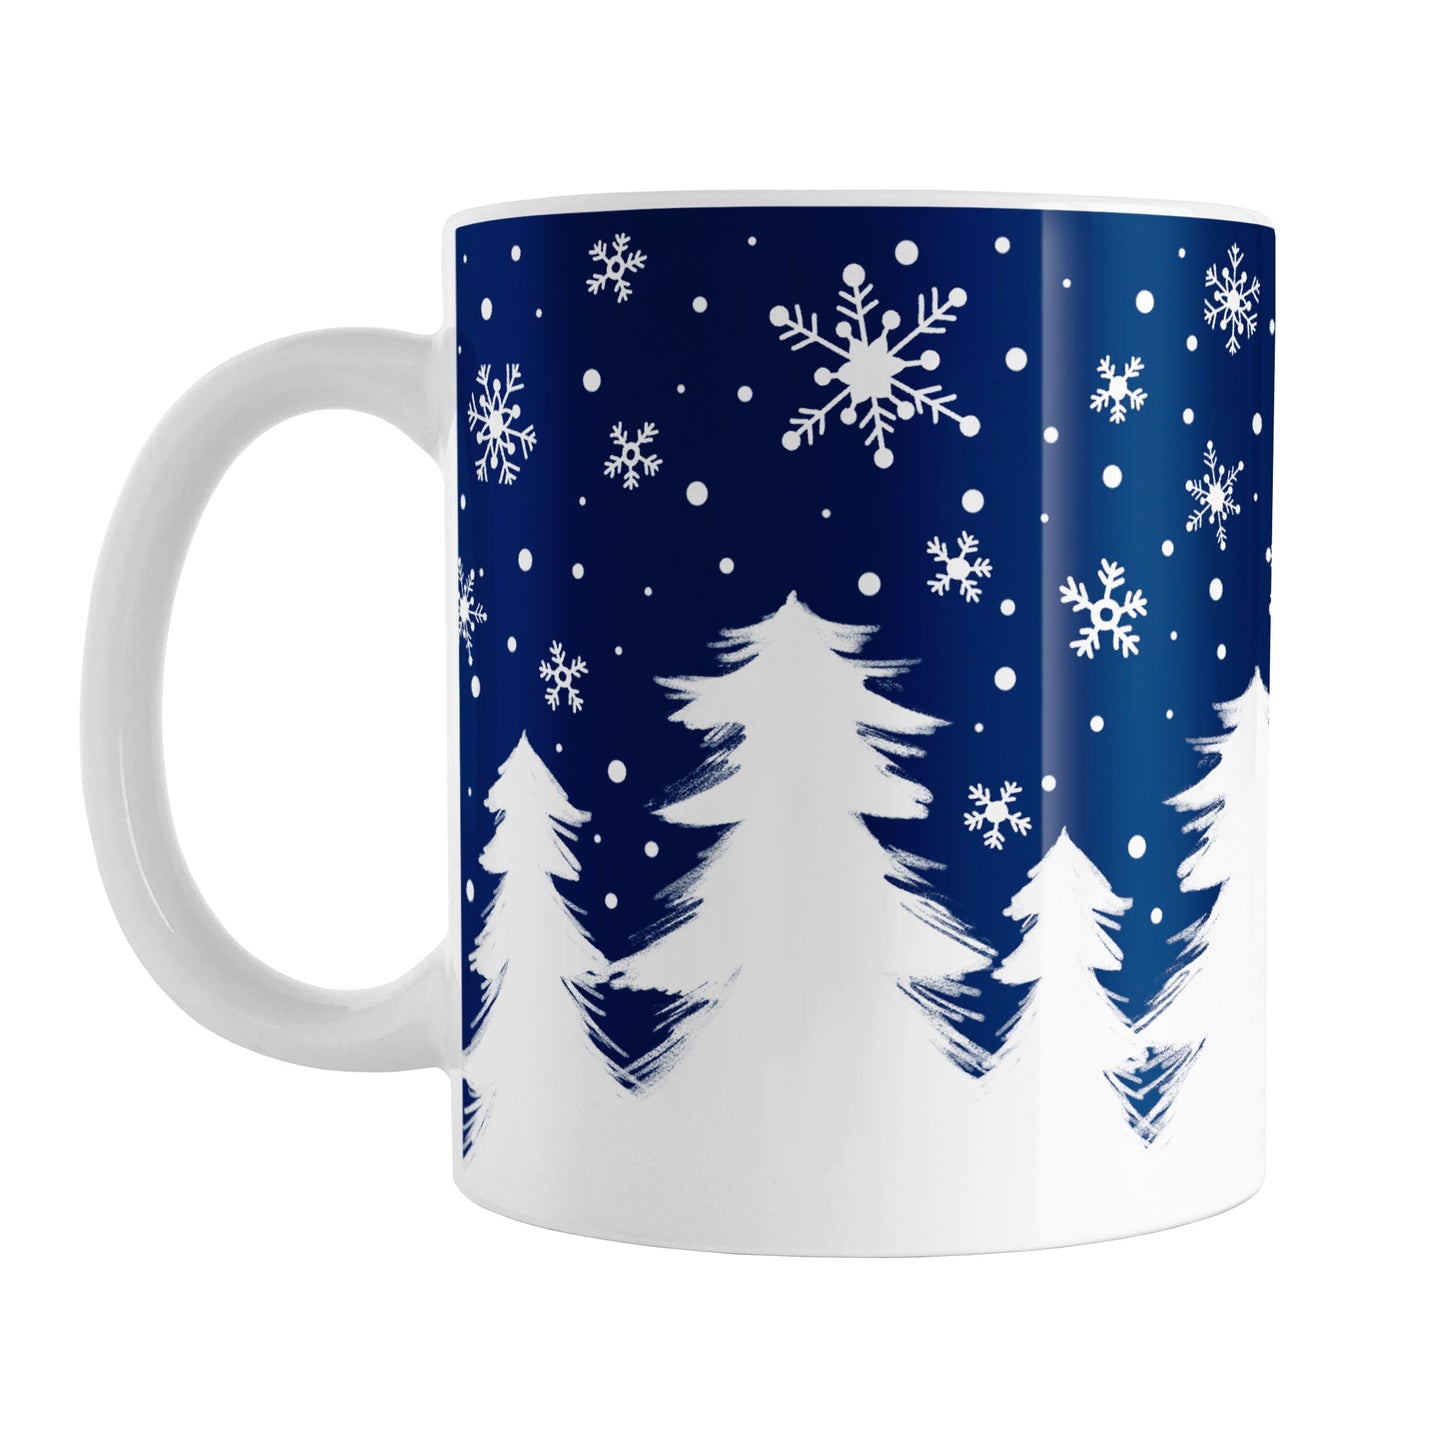 Winter Night Snow Mug (11oz) at Amy's Coffee Mugs. A ceramic coffee mug designed with an illustrated winter night snow treeline. The design features a navy blue sky is filled with white snowflakes over a row of white pine trees along the bottom.